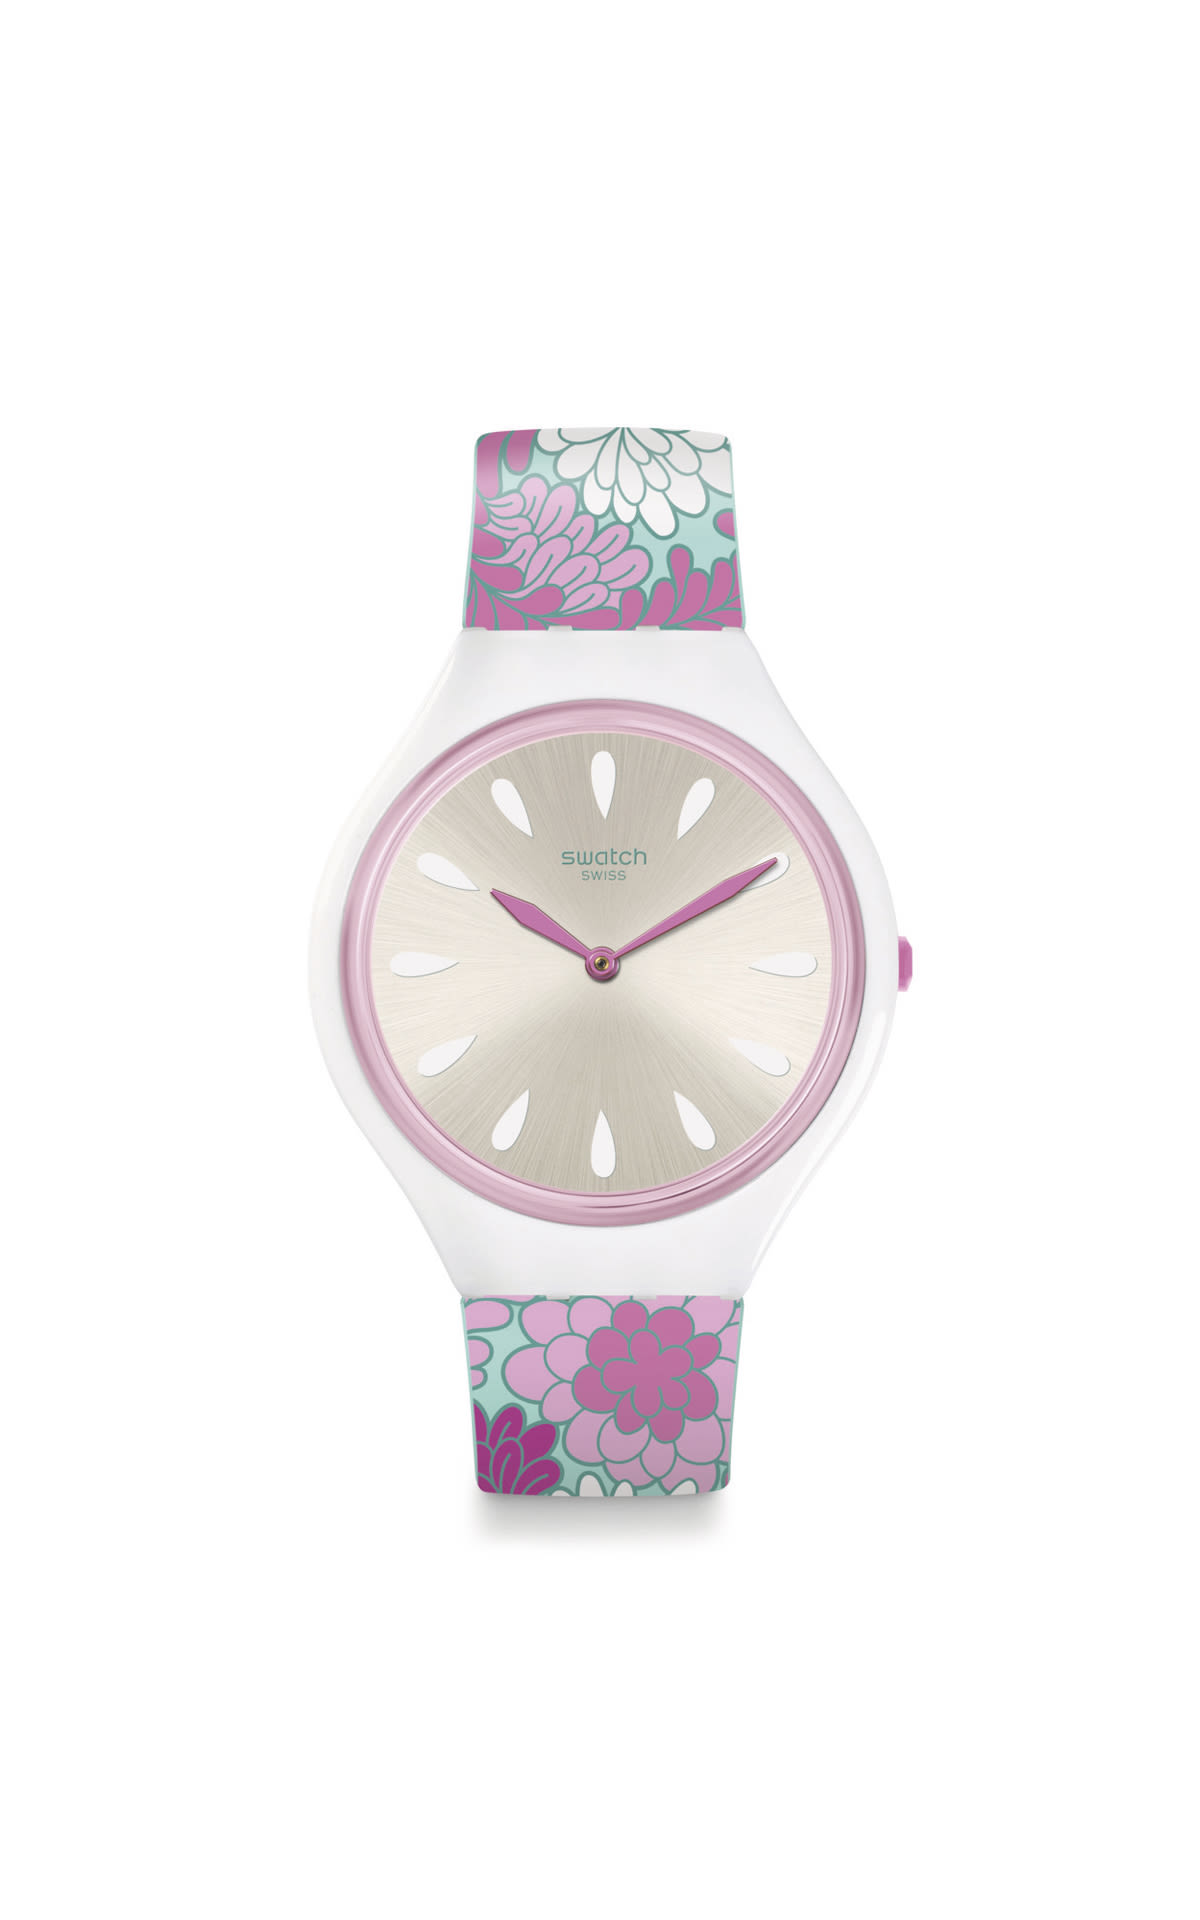 White and pink watch with flowers Swatch